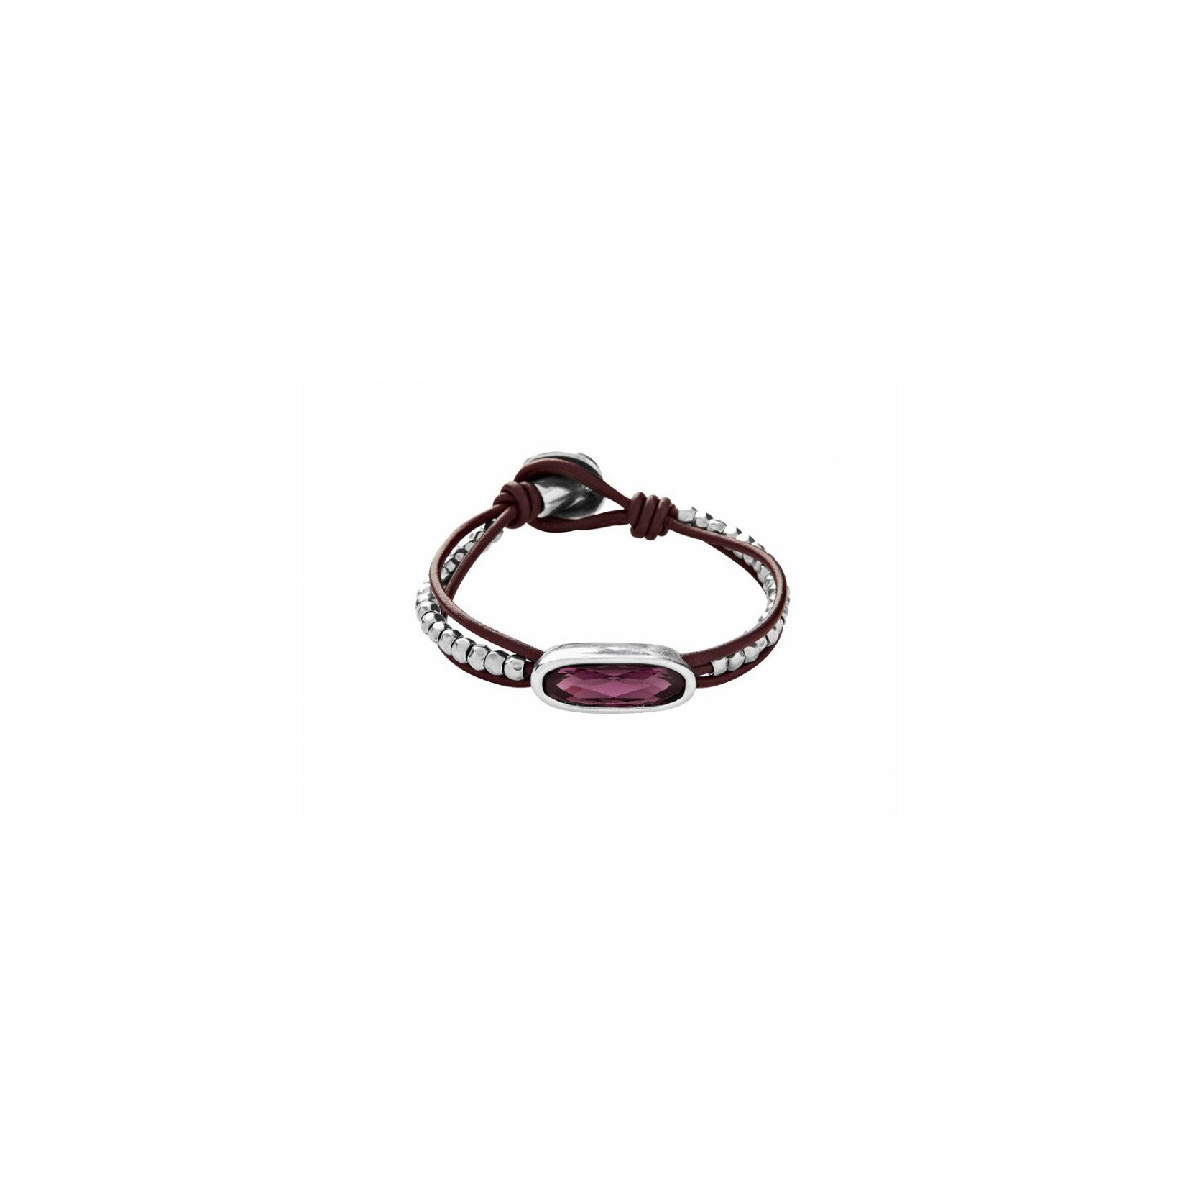 Pulsera Unode50 ¨The tribe¨